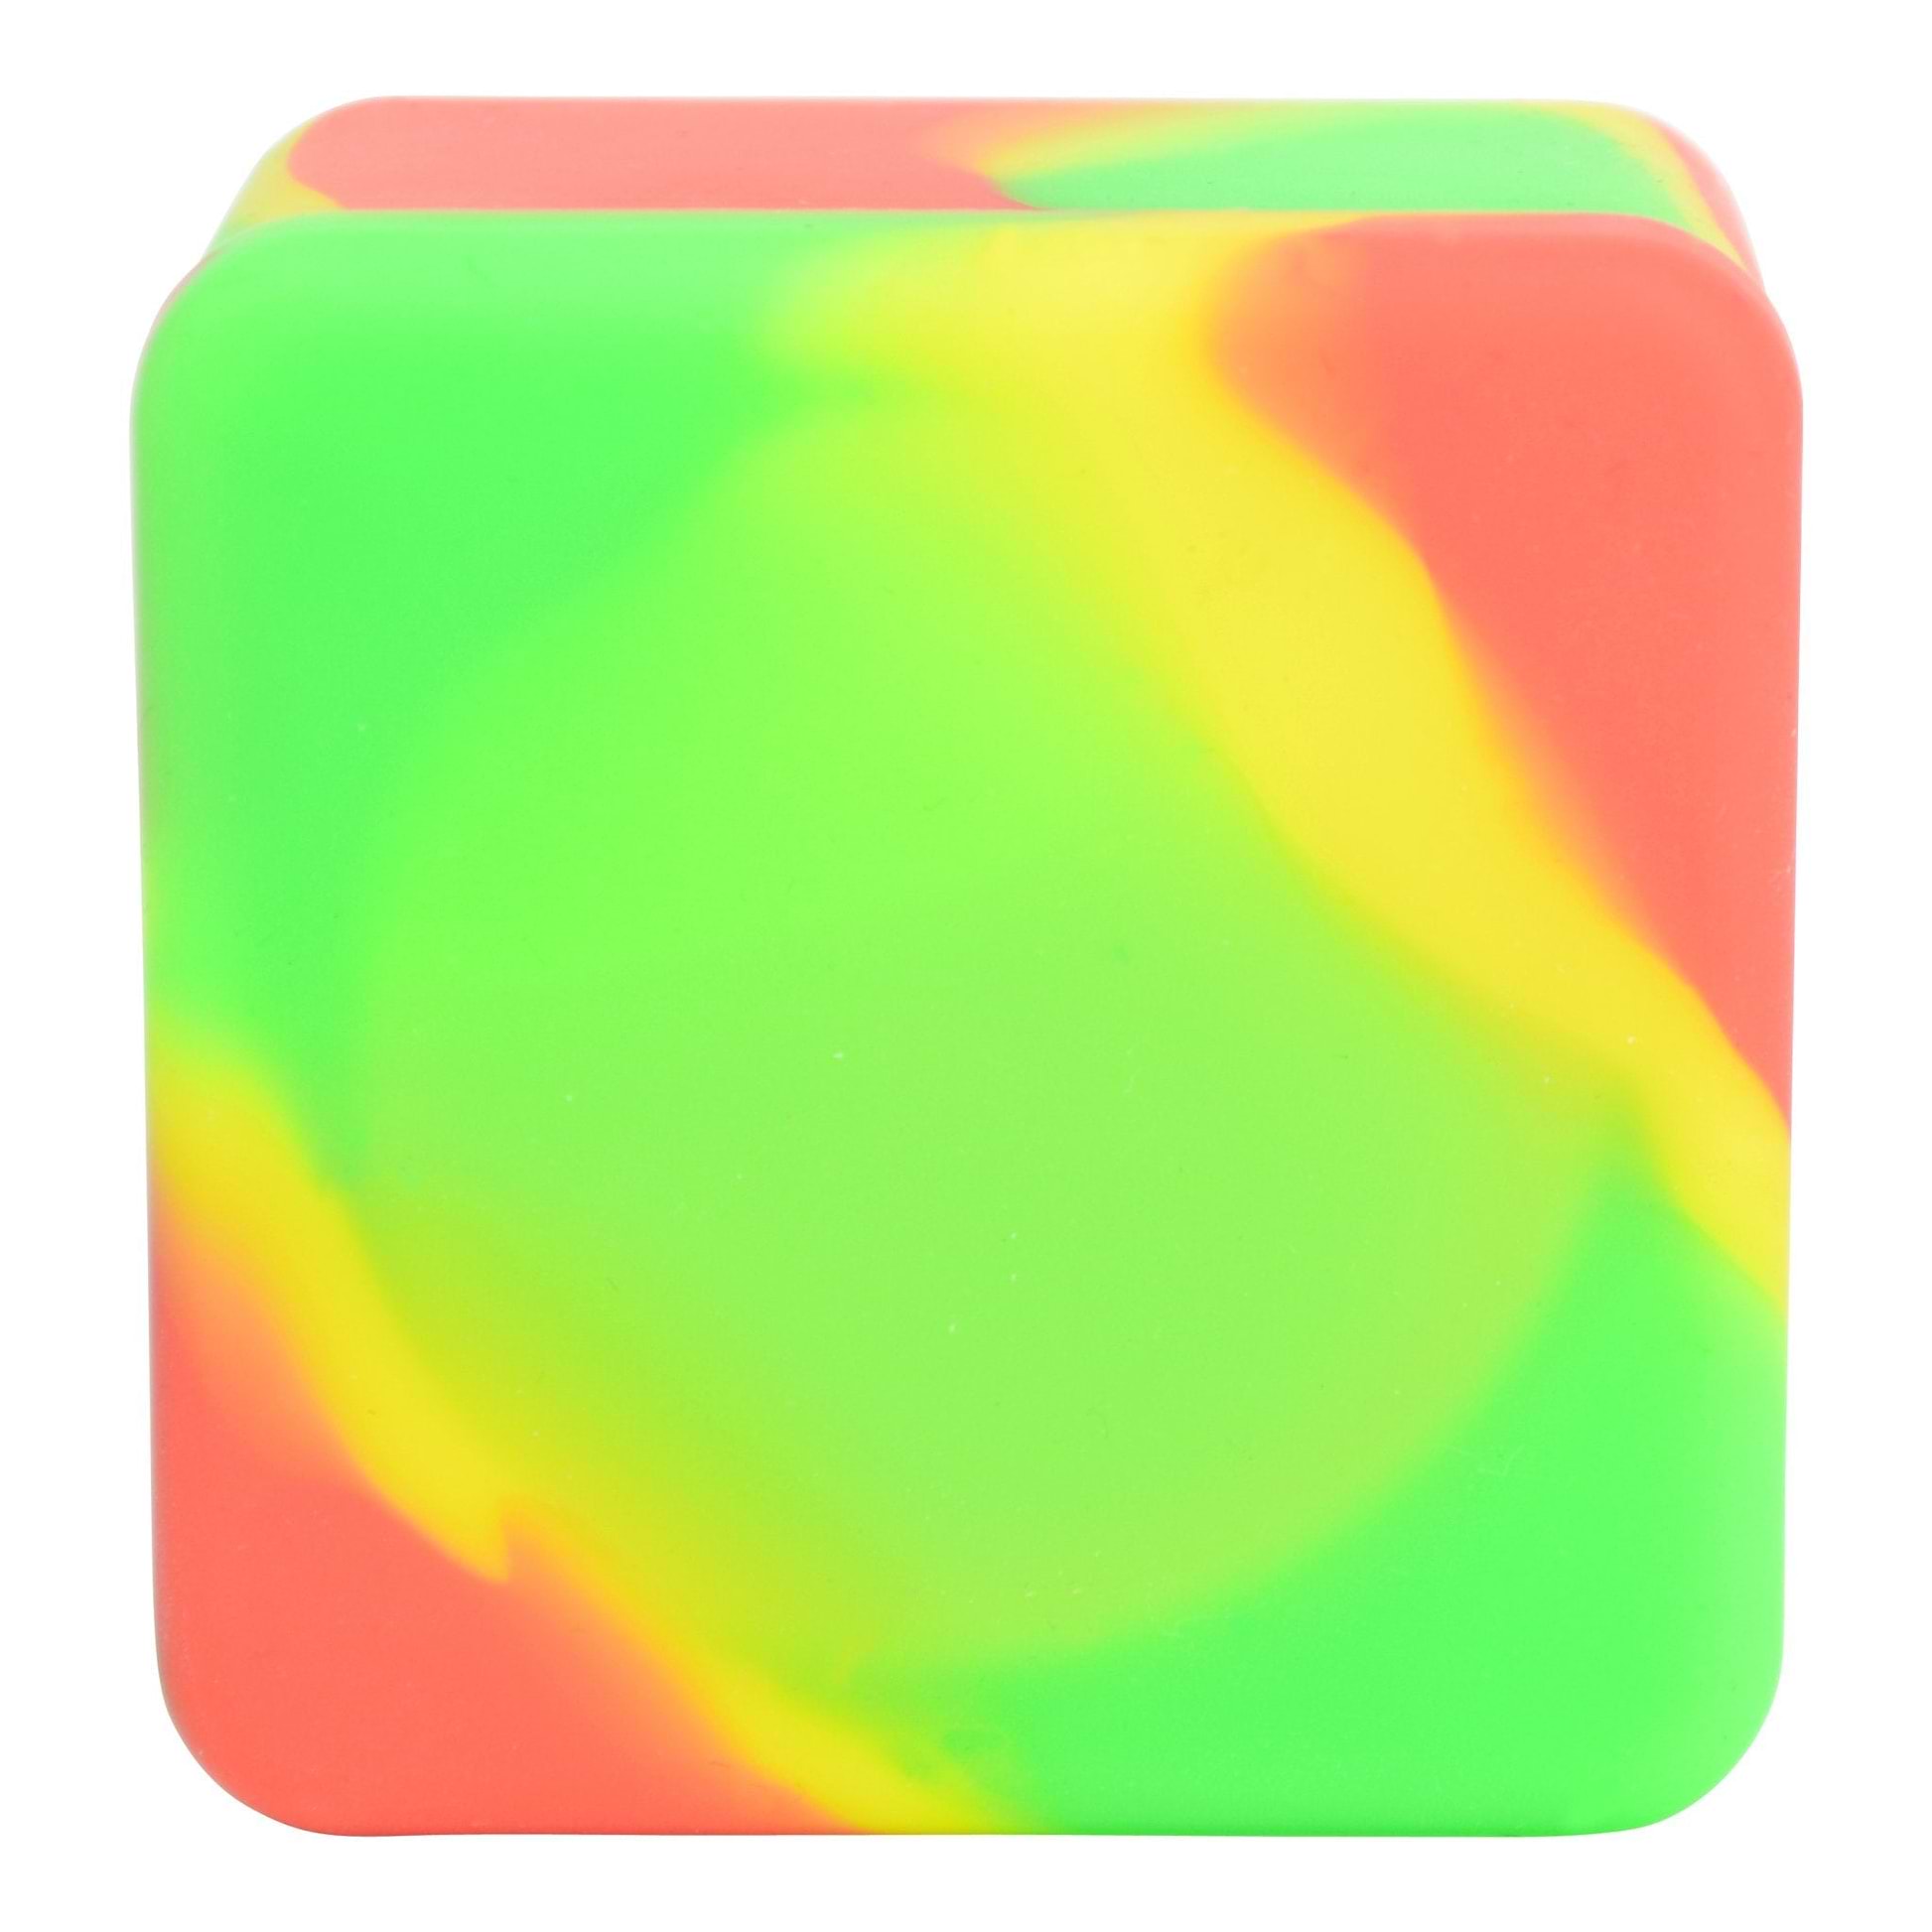 Full close up shot of closed square rasta-themed wax container in red, yellow and green color swirls